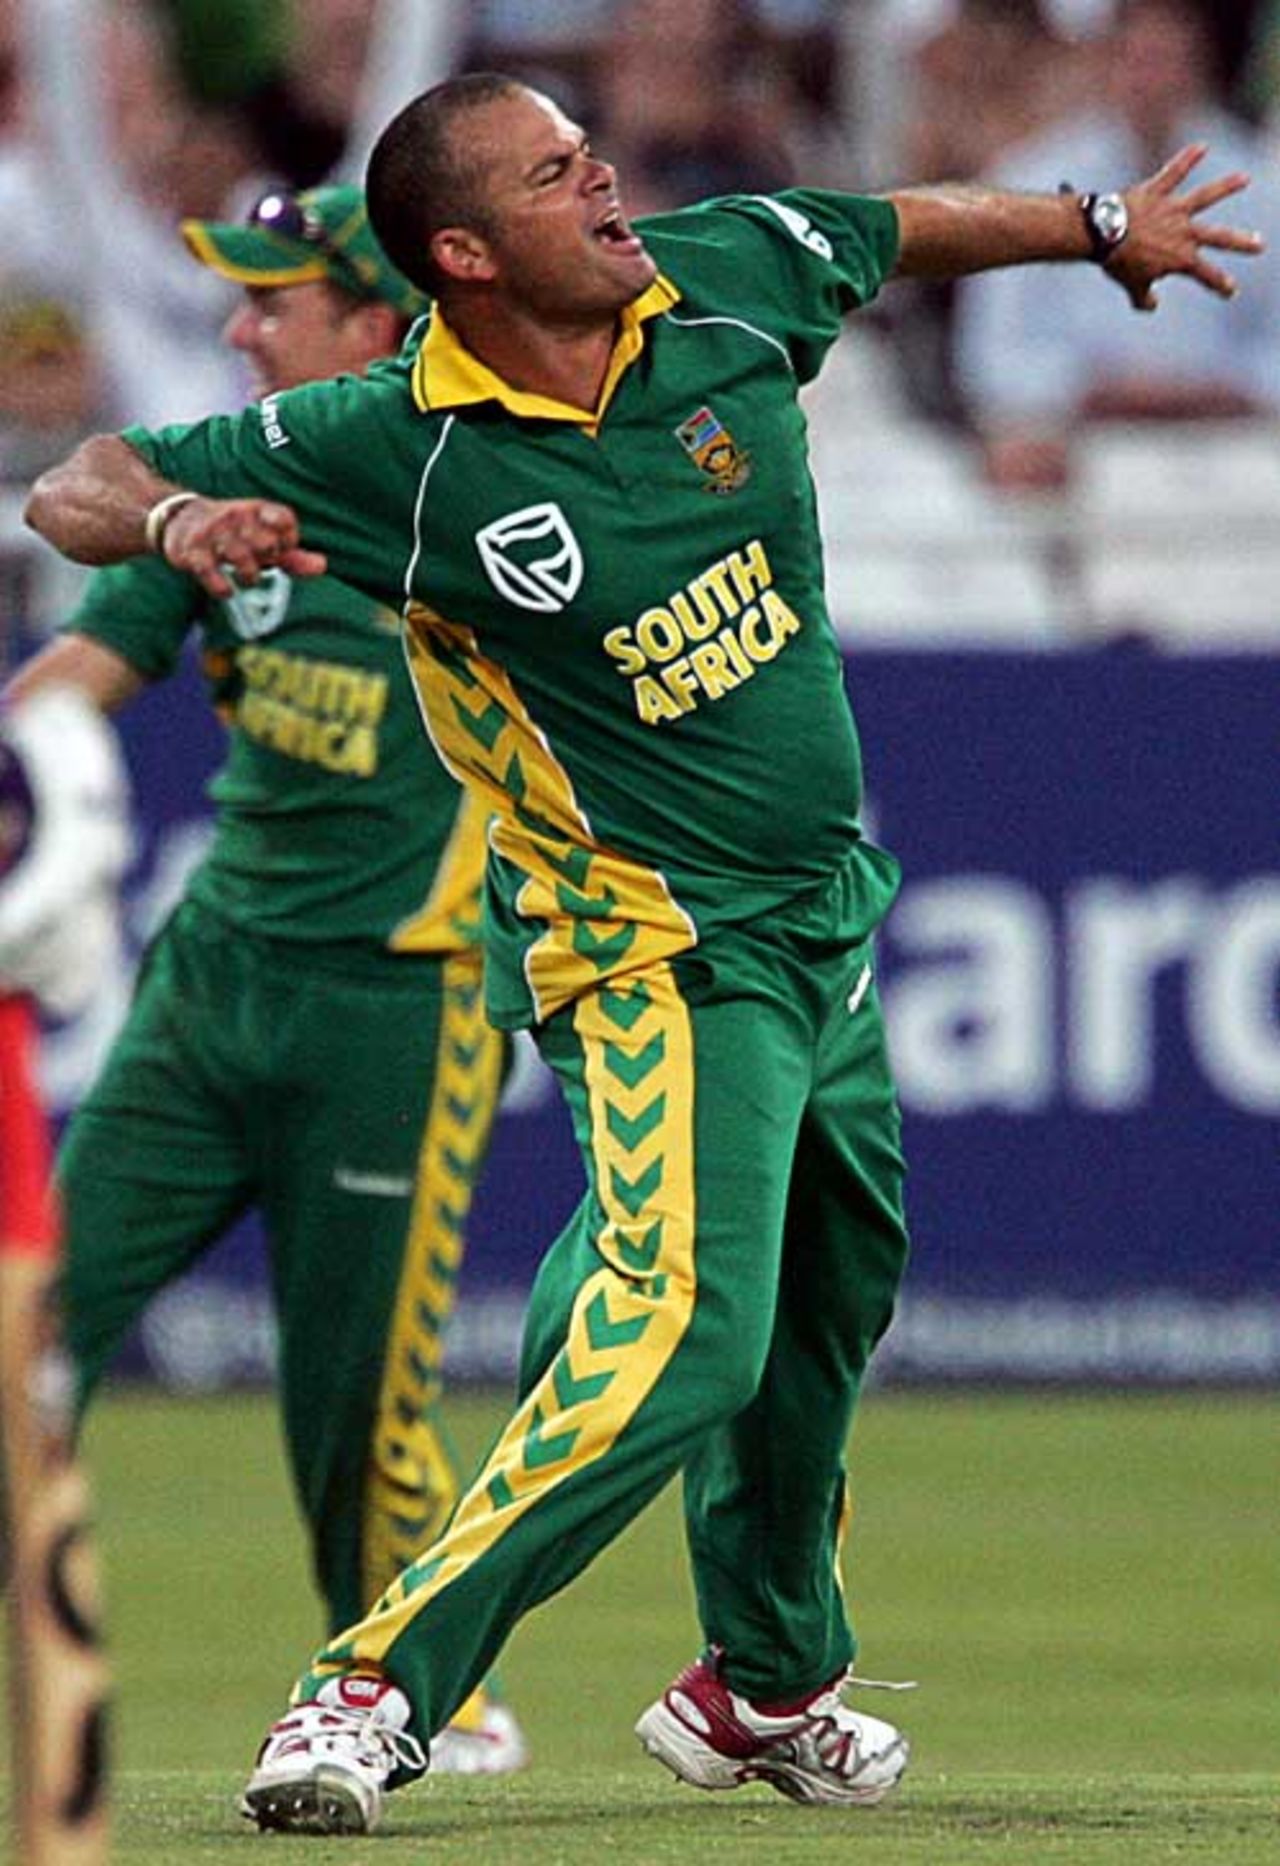 Charl Langeveldt roars his delight after dismissing Sewnarine Chattergoon, South Africa v West Indies, 2nd ODI, Cape Town, January 25, 2008